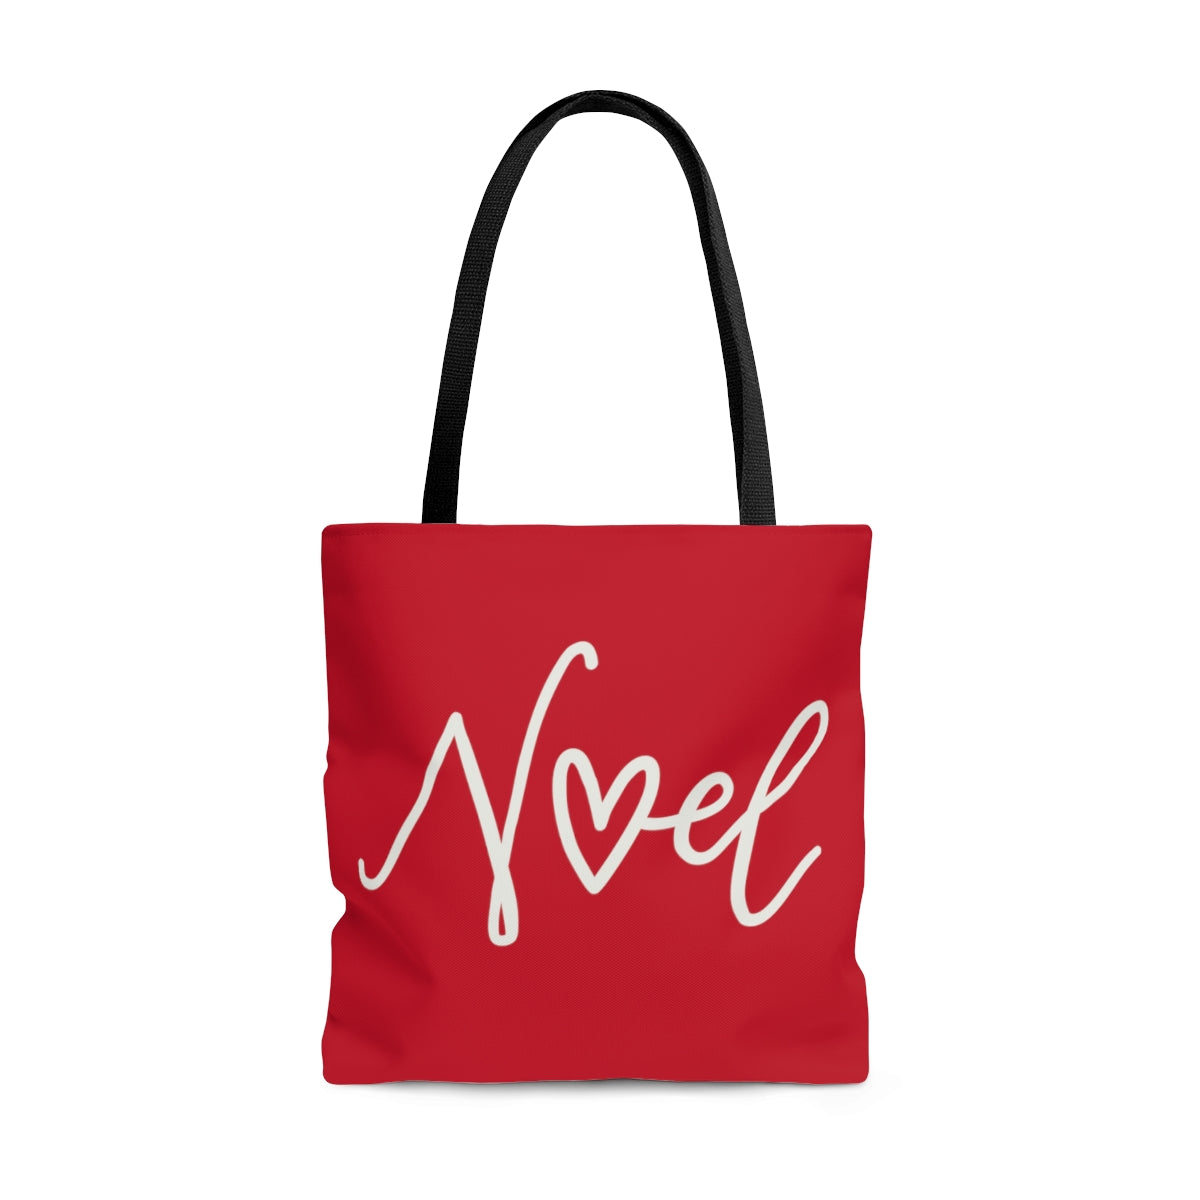 Noel Red Holiday Tote Bag - Travel Grocery Carry-on